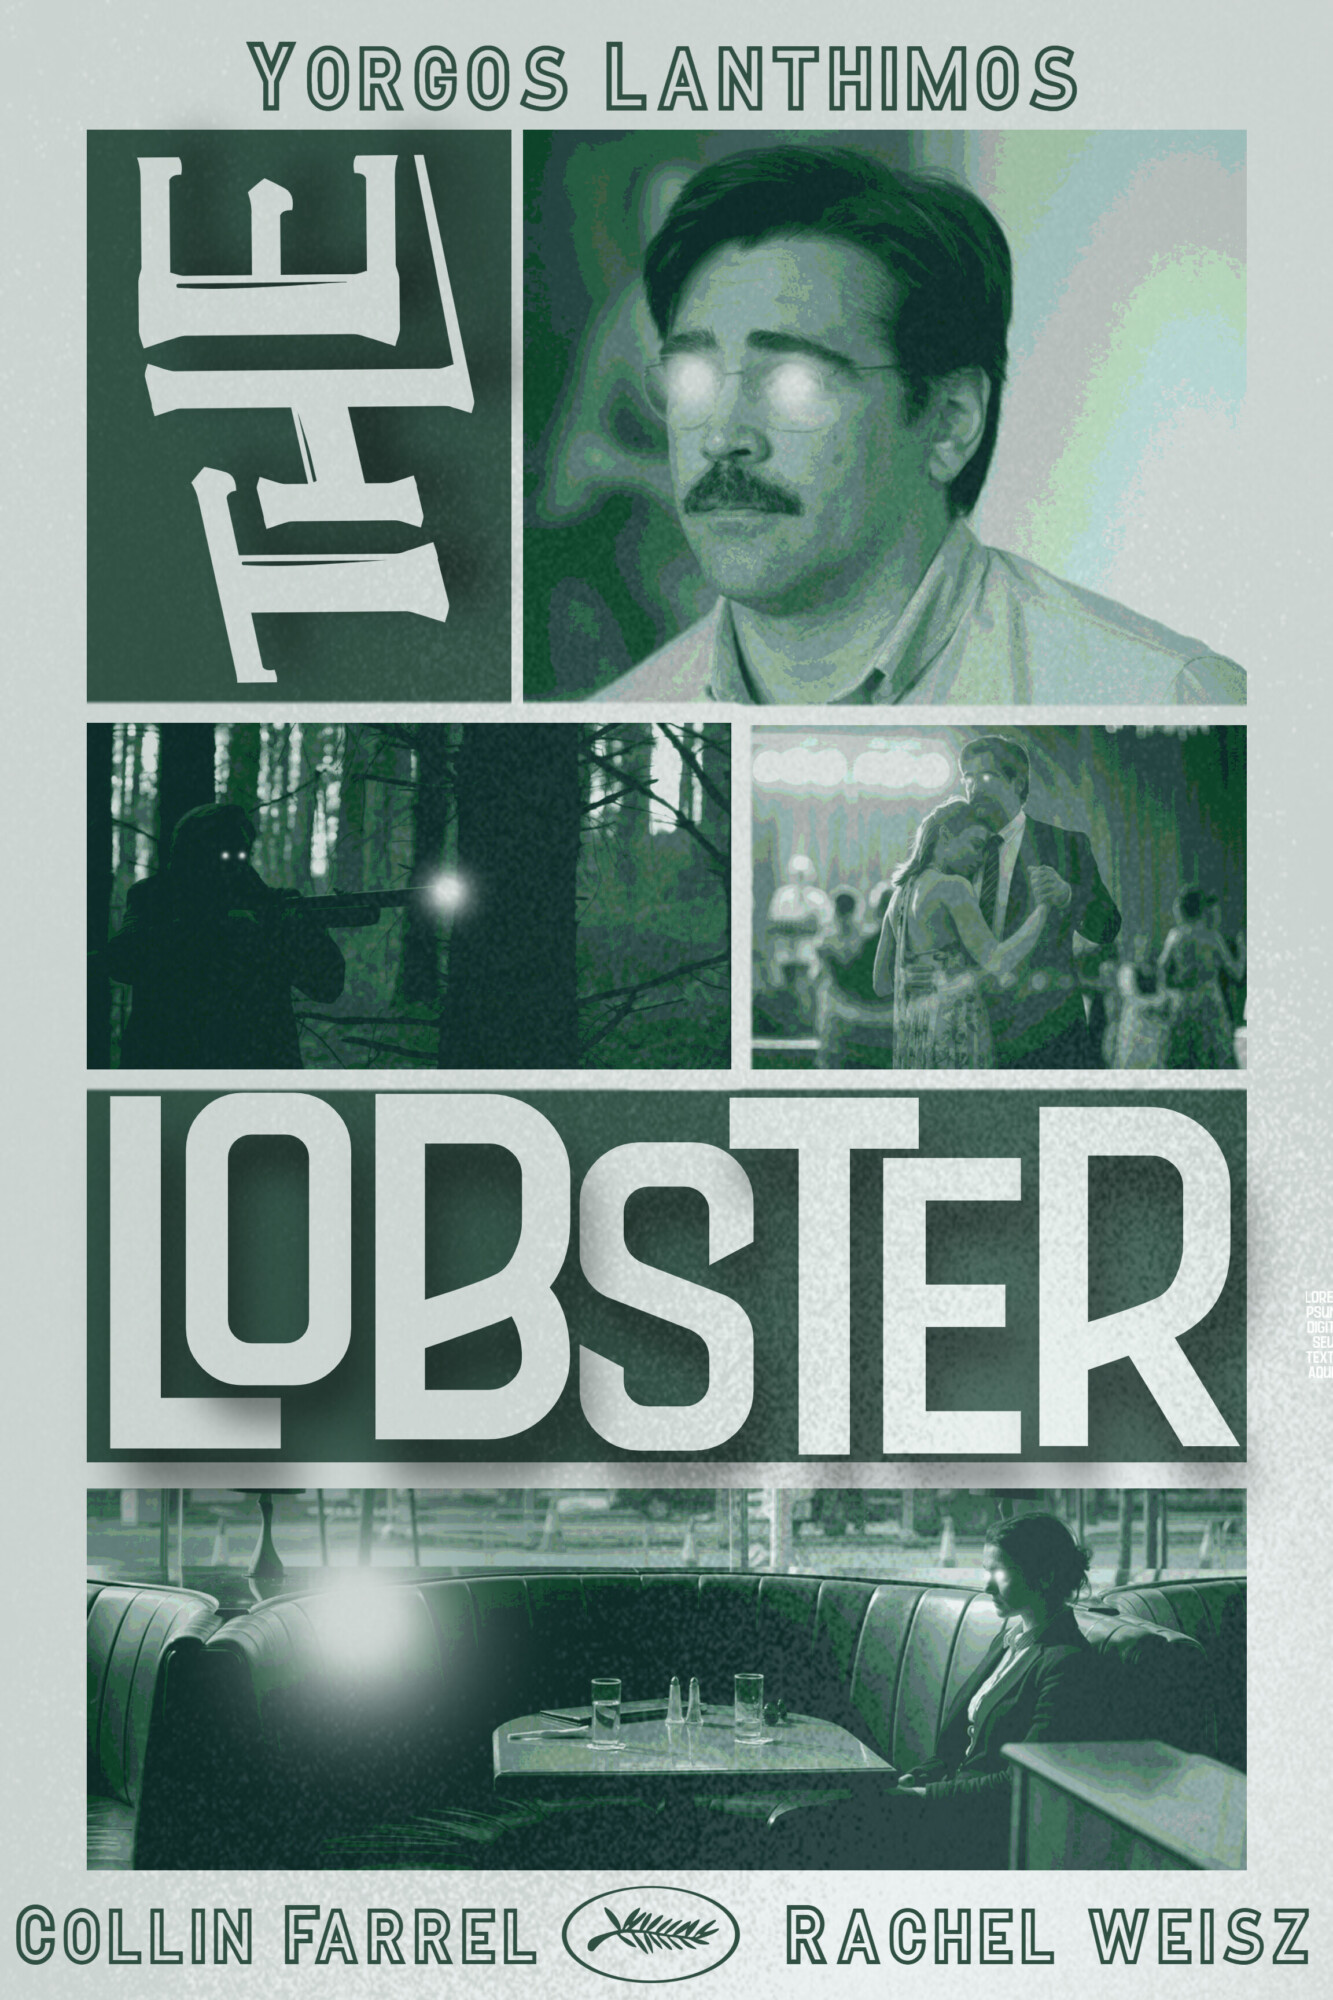 THE LOBSTER (2015)